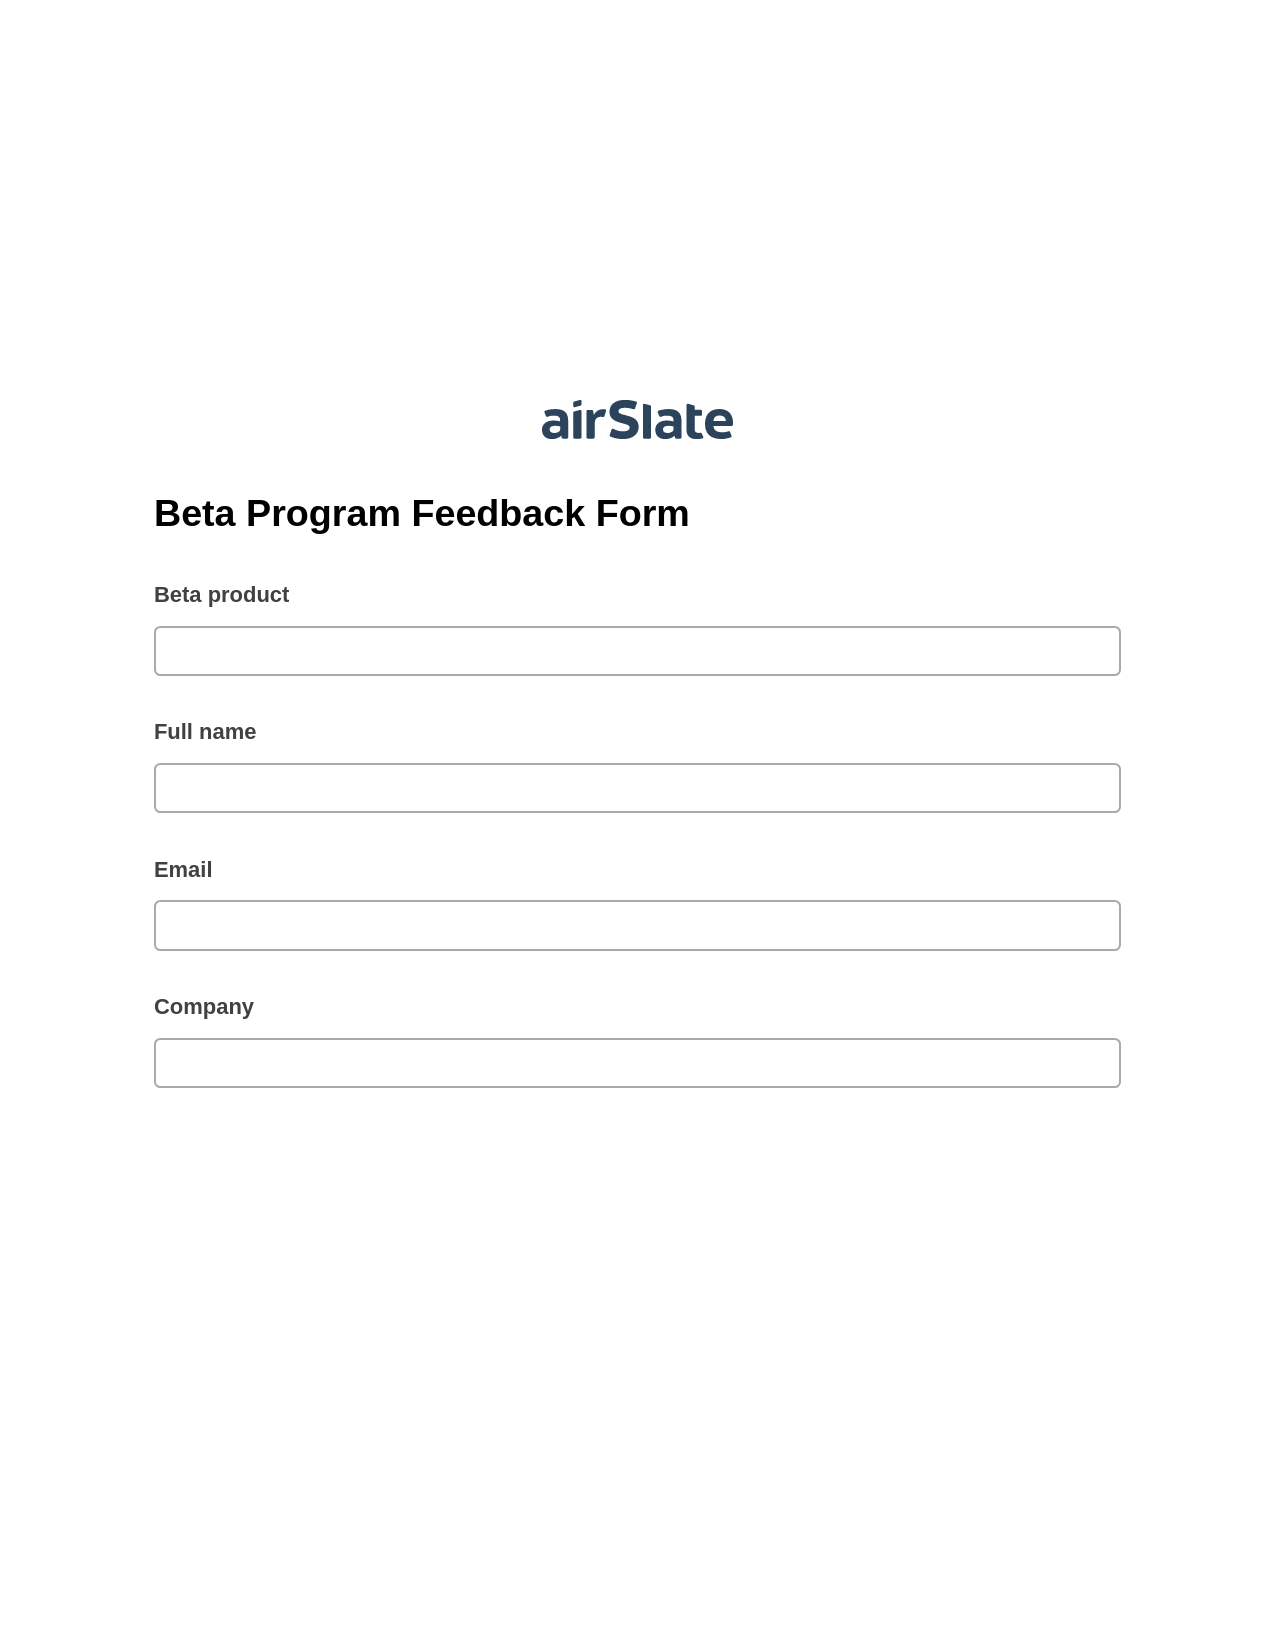 Multirole Beta Program Feedback Form Pre-fill Slate from MS Dynamics 365 Records Bot, SendGrid send Campaign bot, Export to NetSuite Record Bot